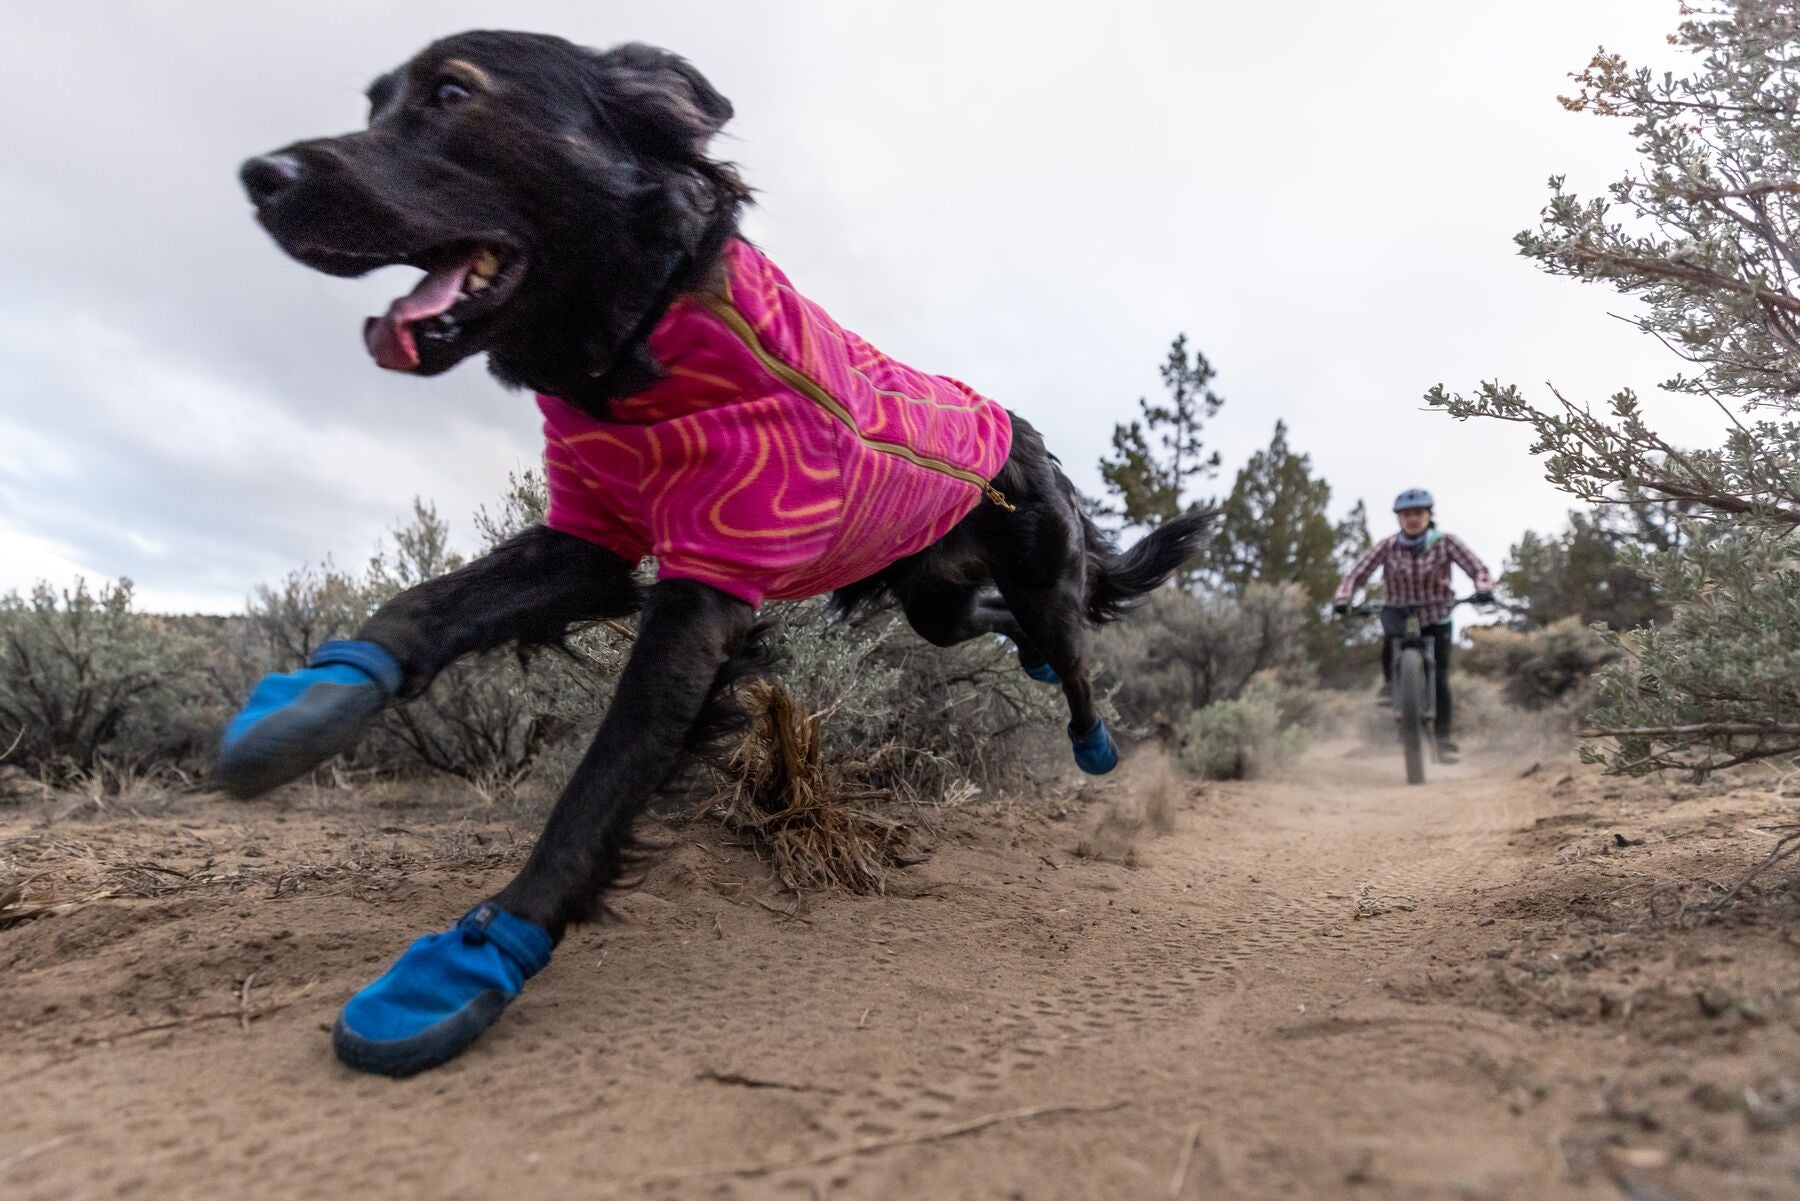 Dog wearing a fleece jacket and boots running with their person following behind them on a mountain bike